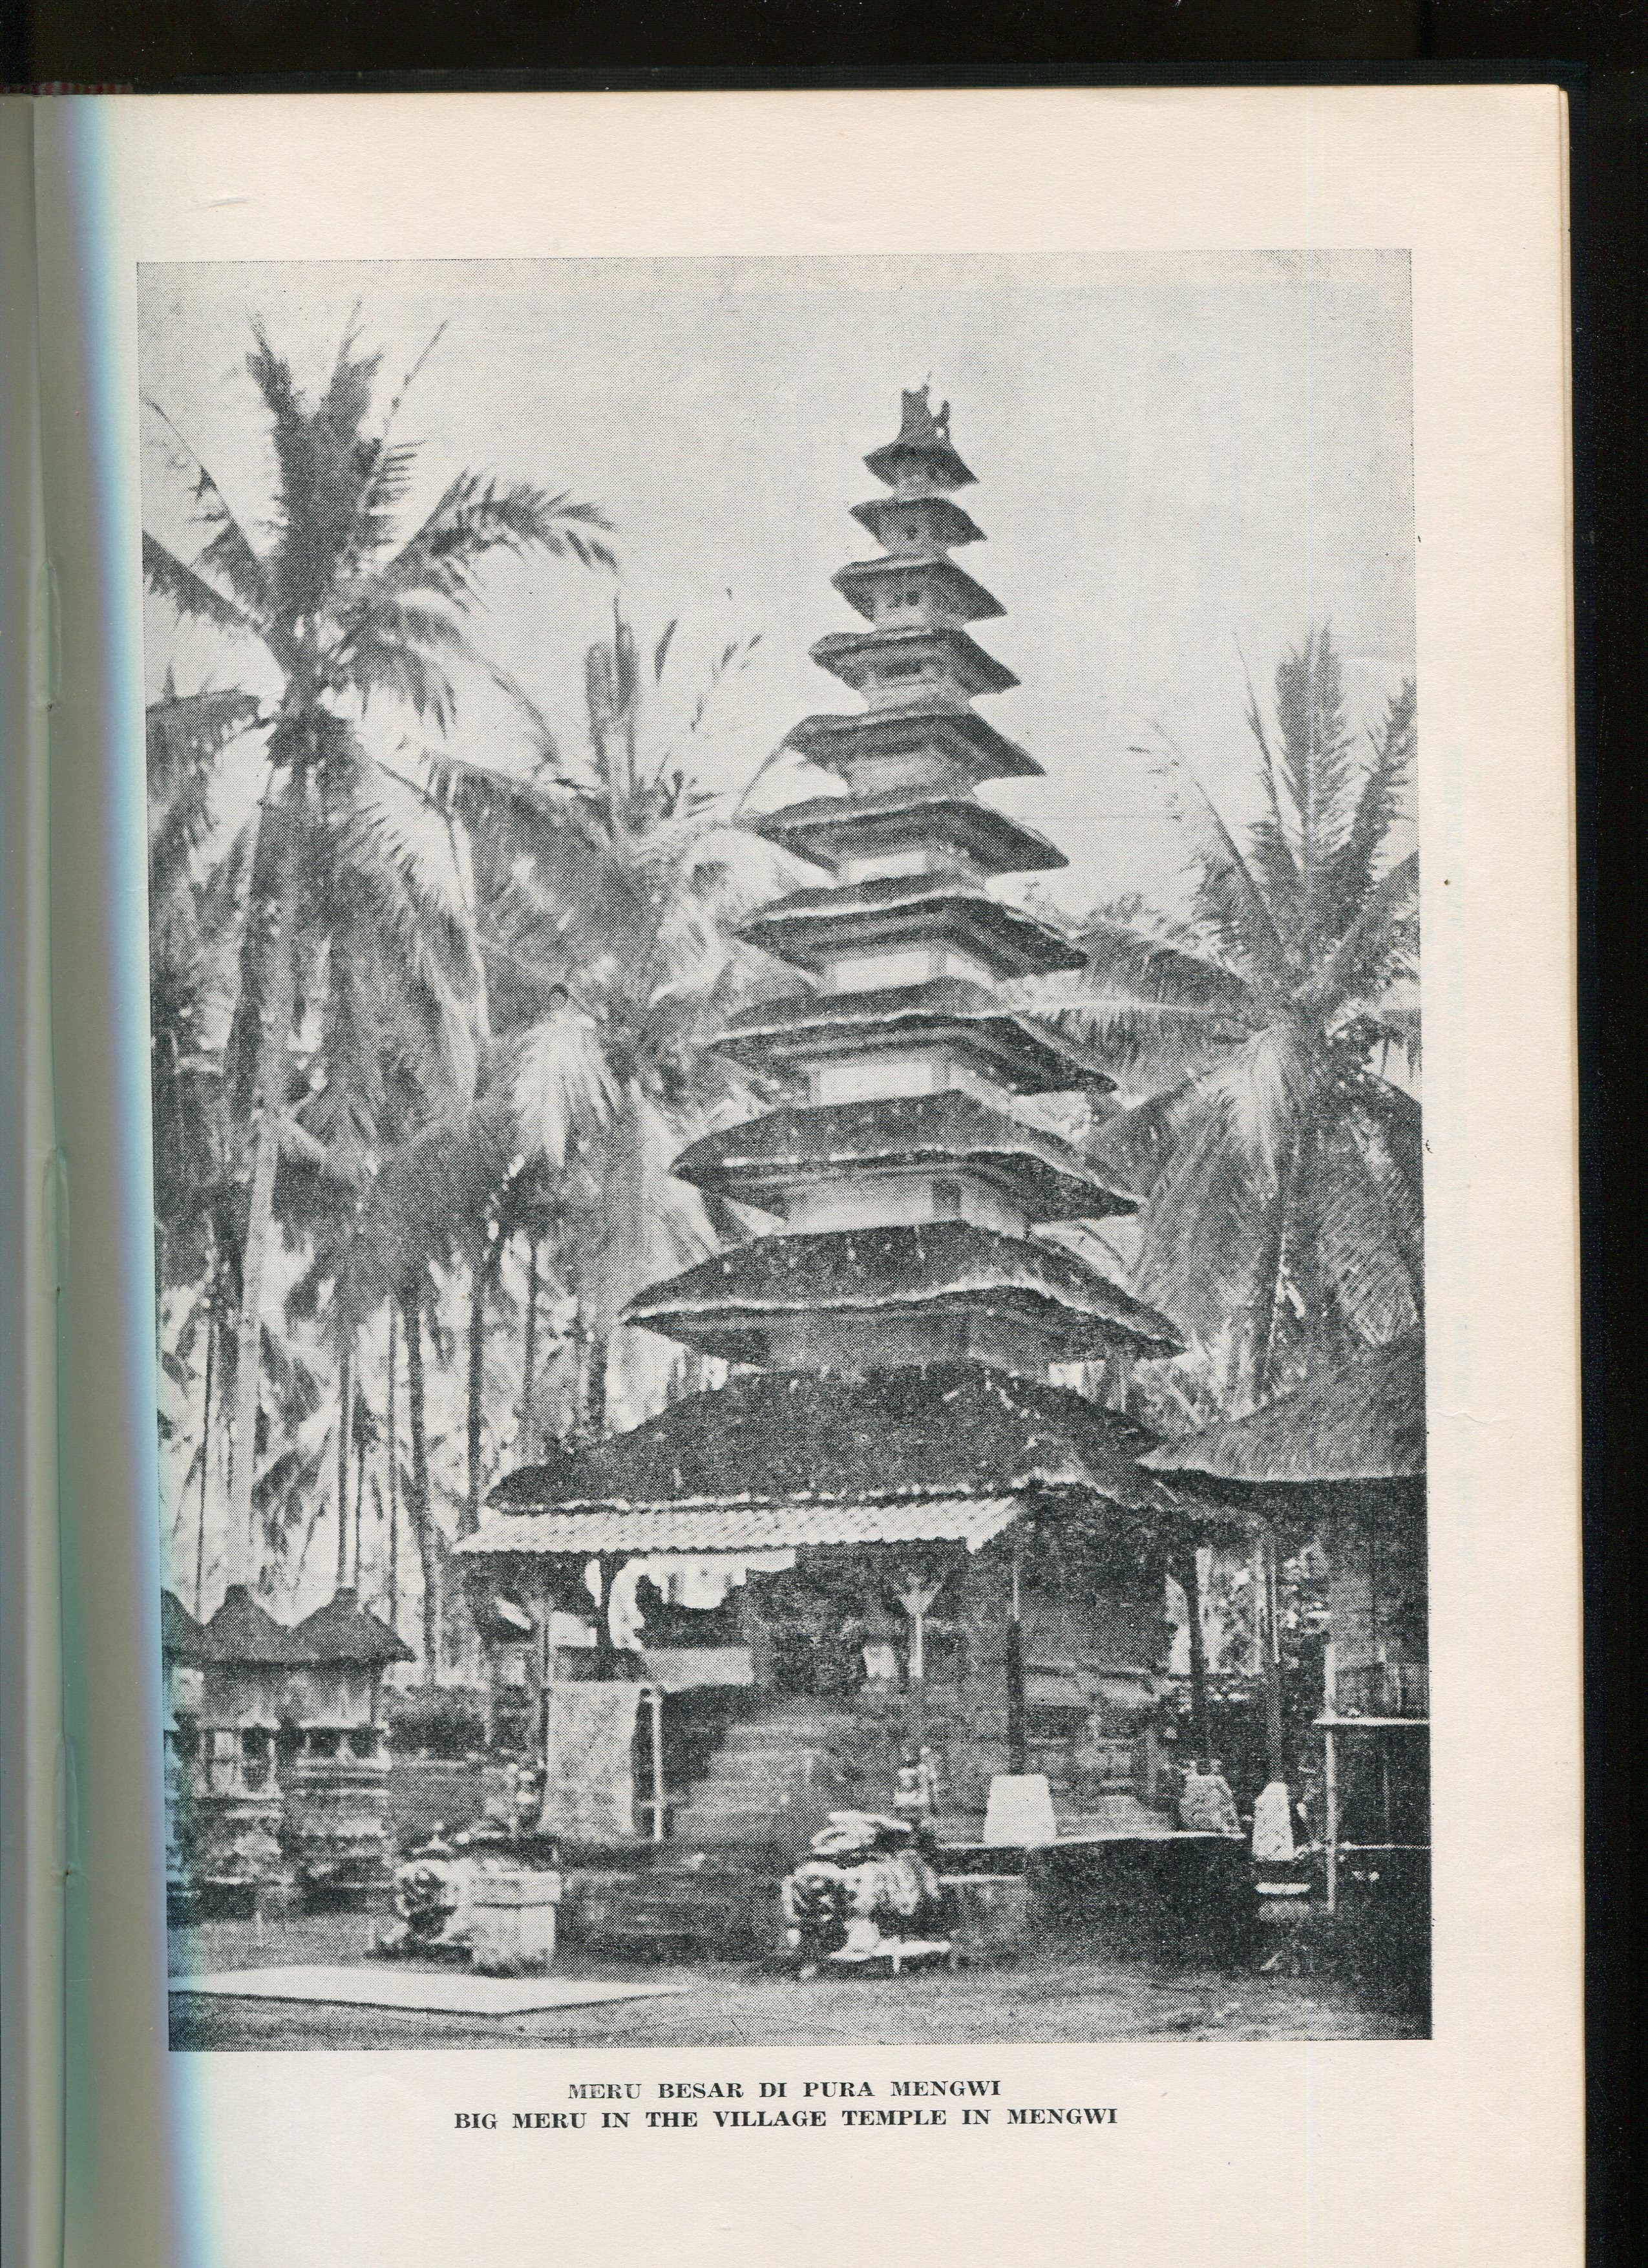 SELECTION OF VARIOUS BOOKS (INDONESIA-RELATED) VARIOUS CONDITIONS - Image 16 of 16